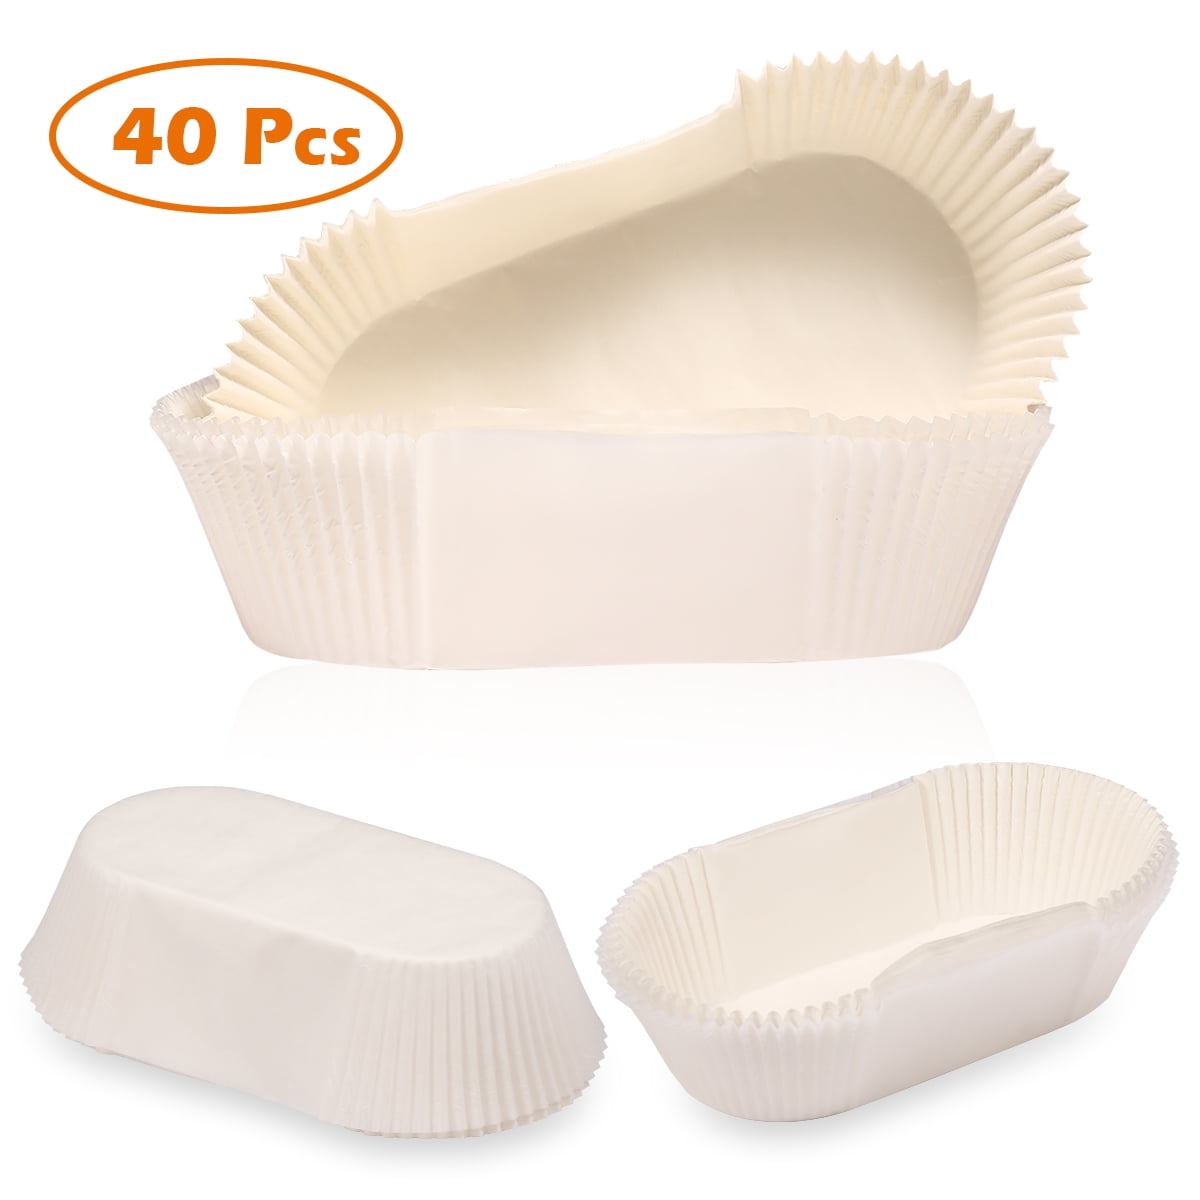 Free-Air 1 LB Mini Loaf Pans For Baking Bread 50 Pack, Disposable Small  Cake Tins Liners Bread Loaf Baking Cups Molds,Paper Baked Goods Containers